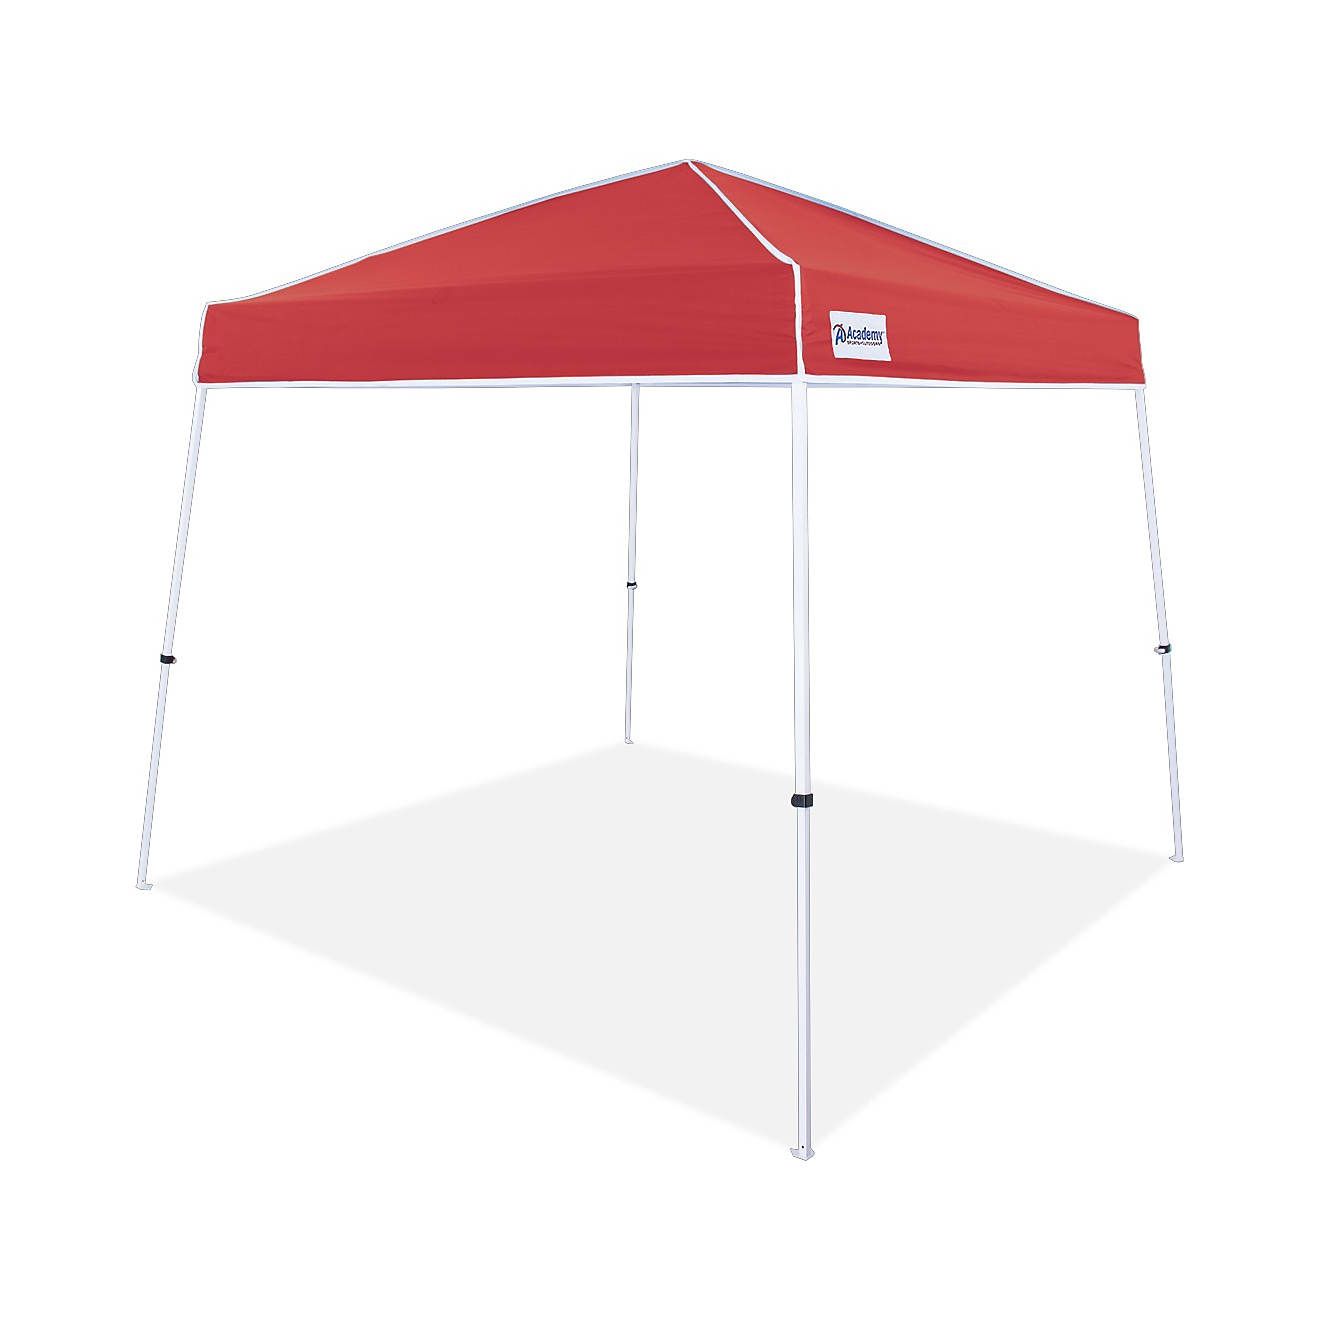 Academy Sports + Outdoors Easy Shade 10 ft x 10 ft Slant Leg Canopy | Academy Sports + Outdoors